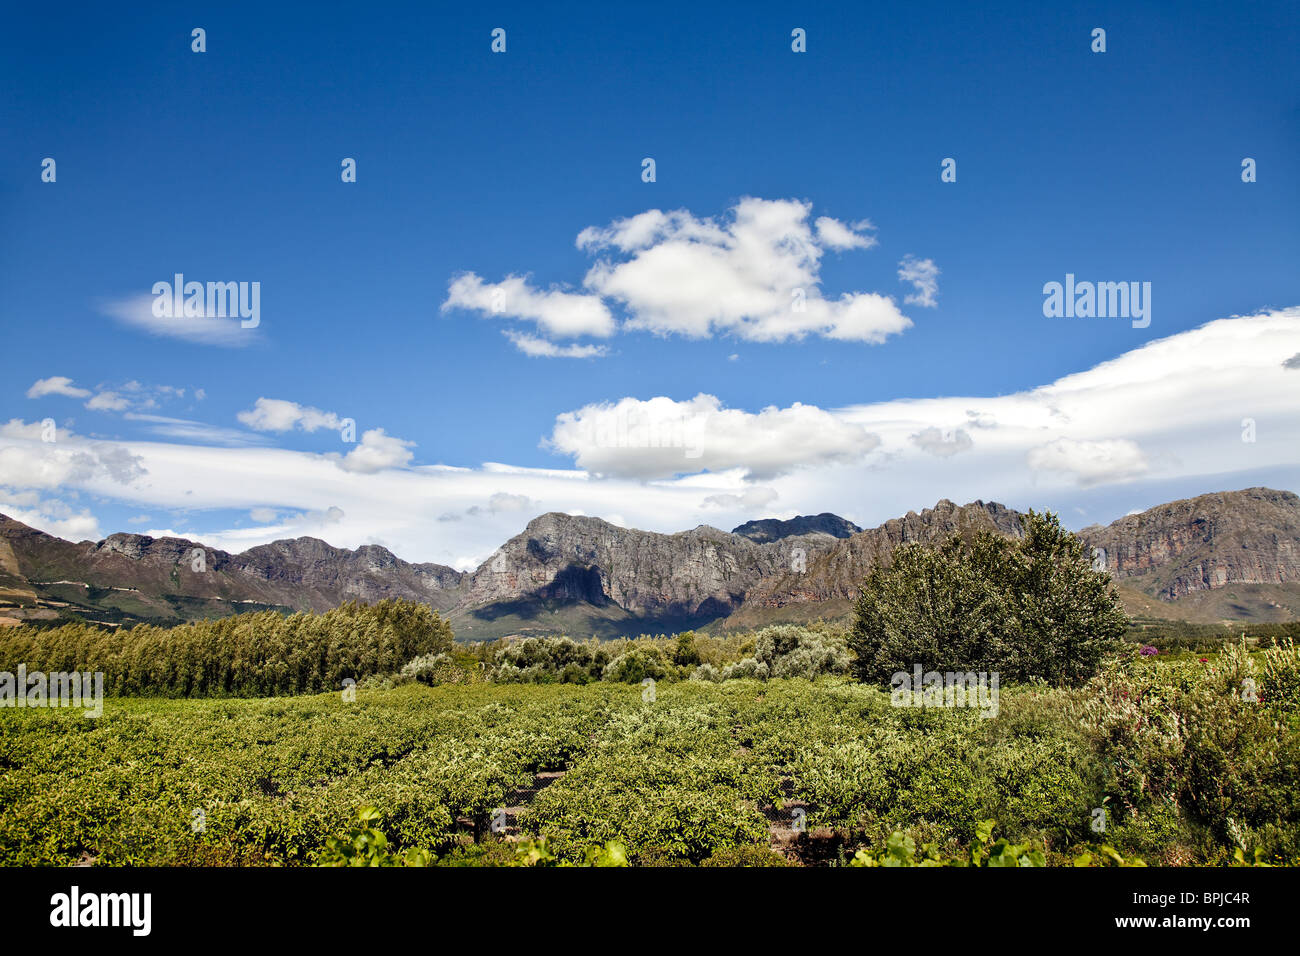 Wineyard at Palmiet Valley Winery, Paarl, Cape Town, Western Cape ...